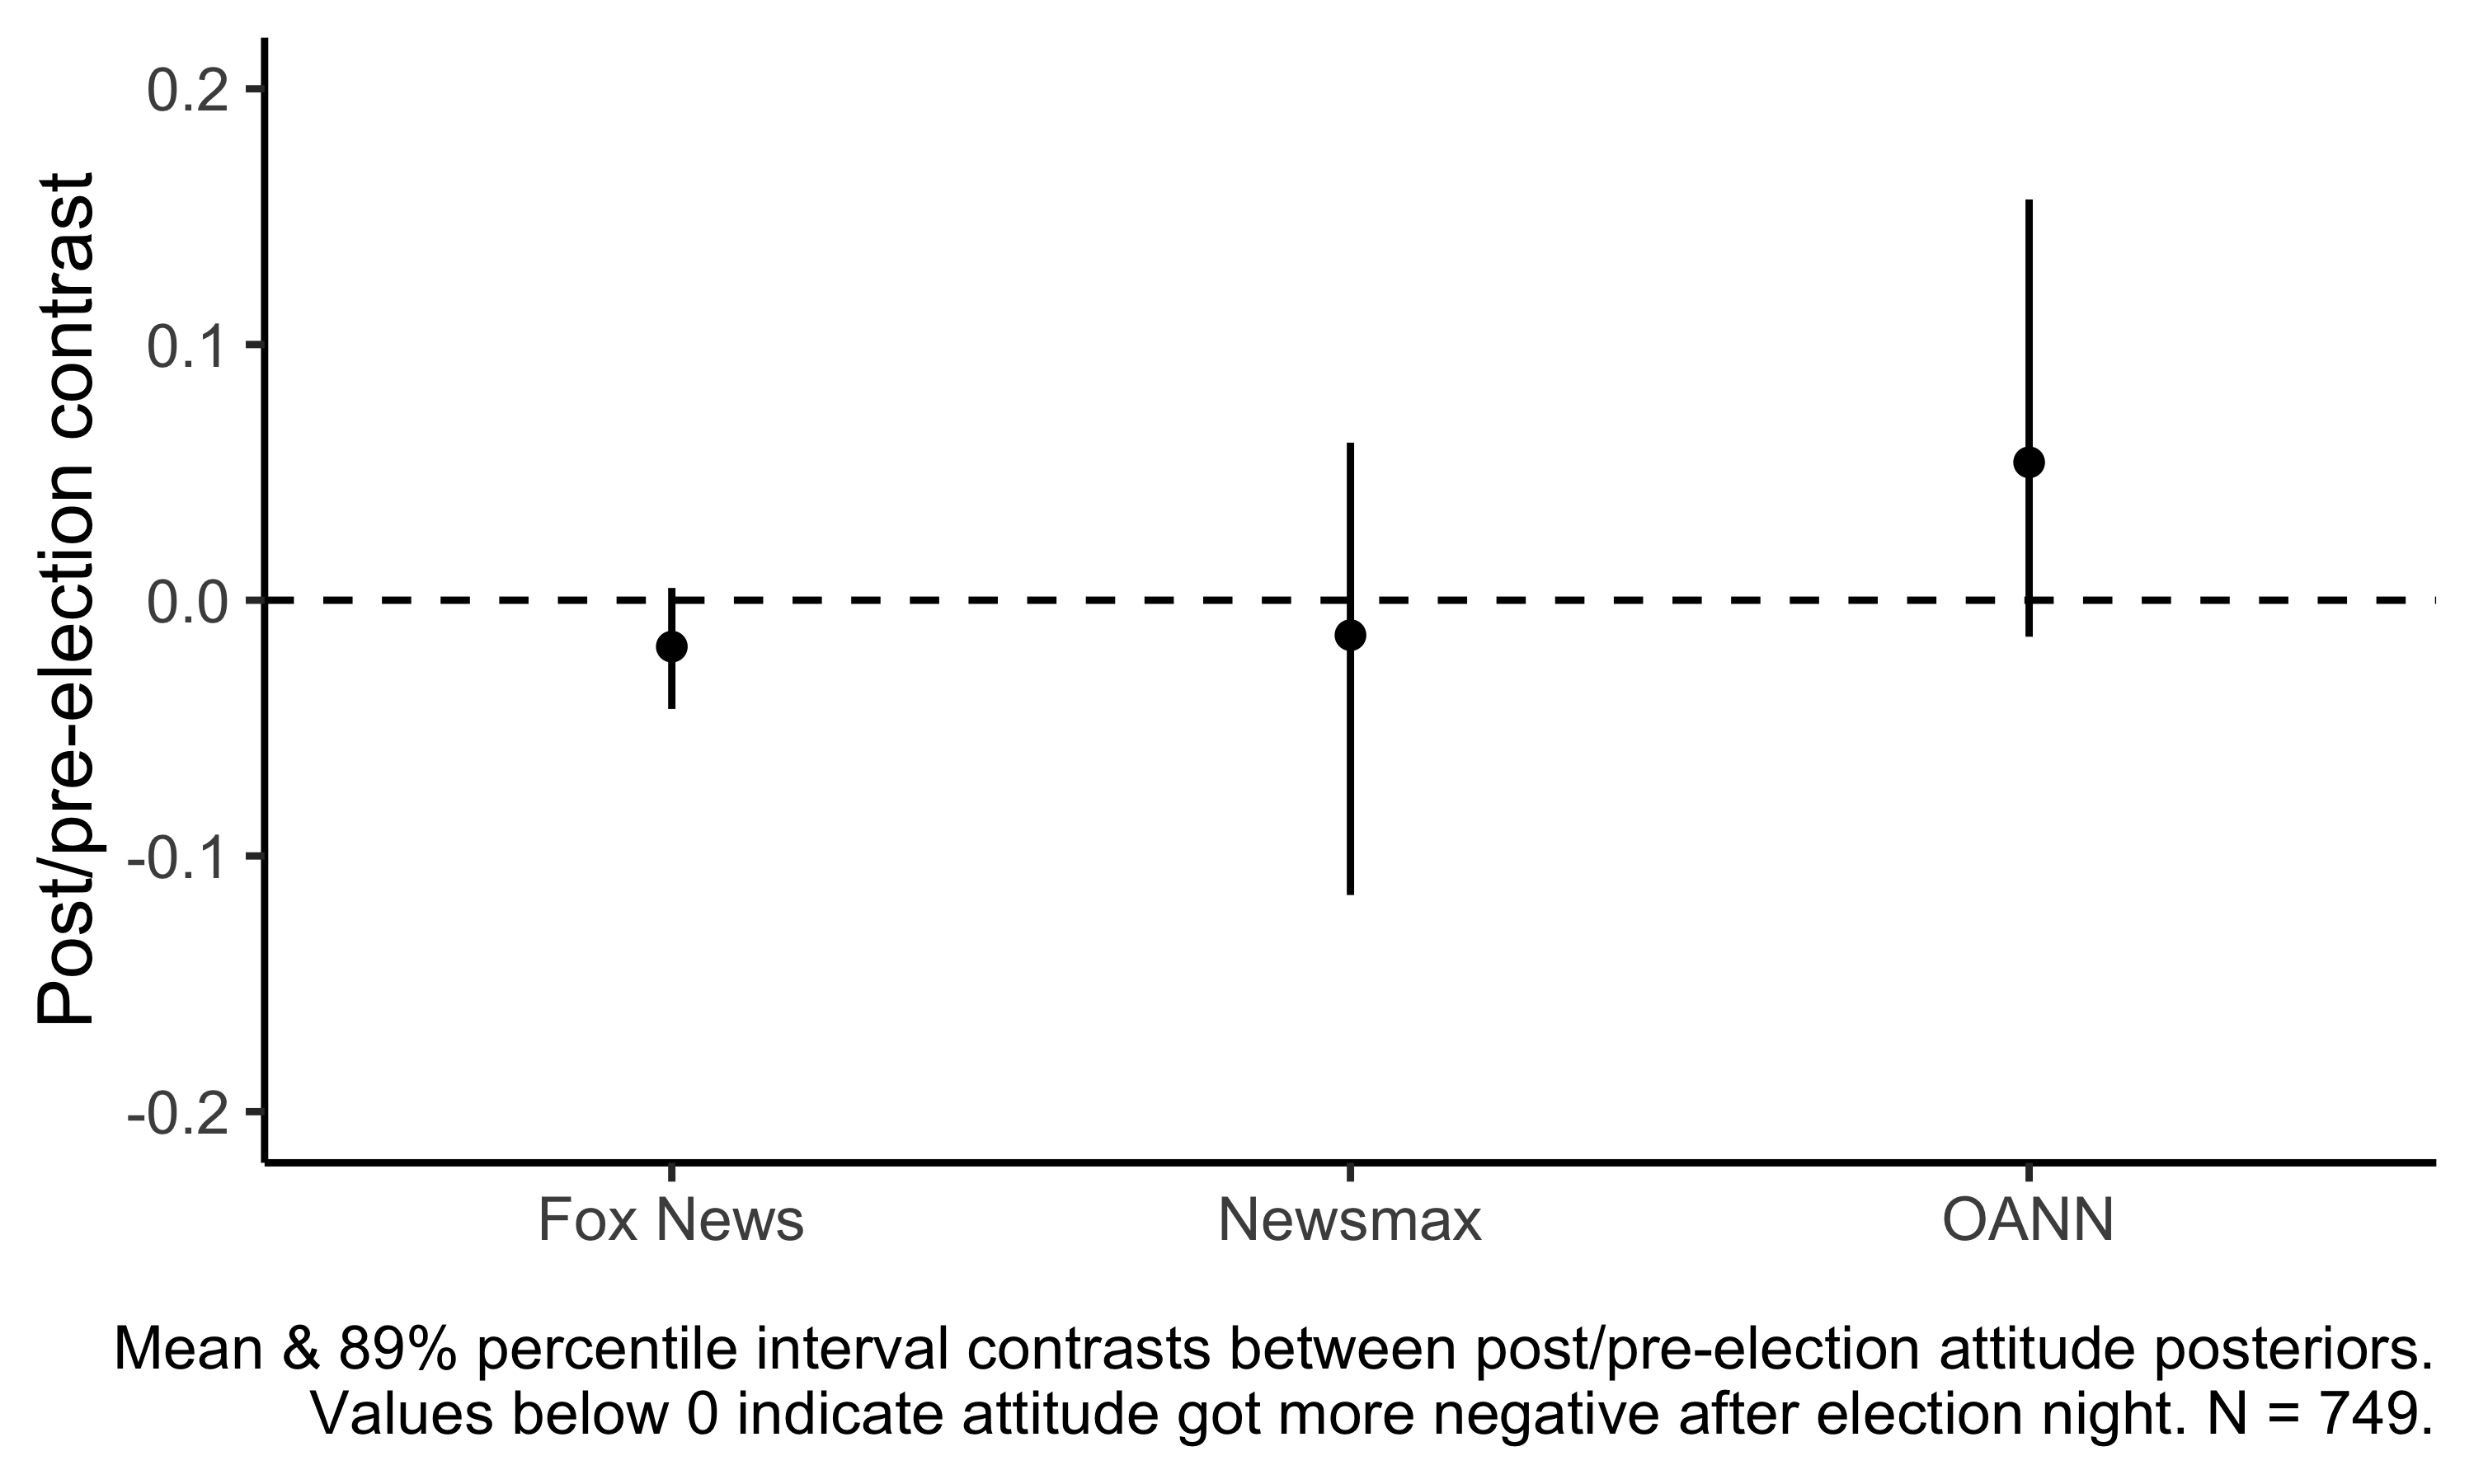 Plot showing contrasts between post- and pre-election attitude posteriors.